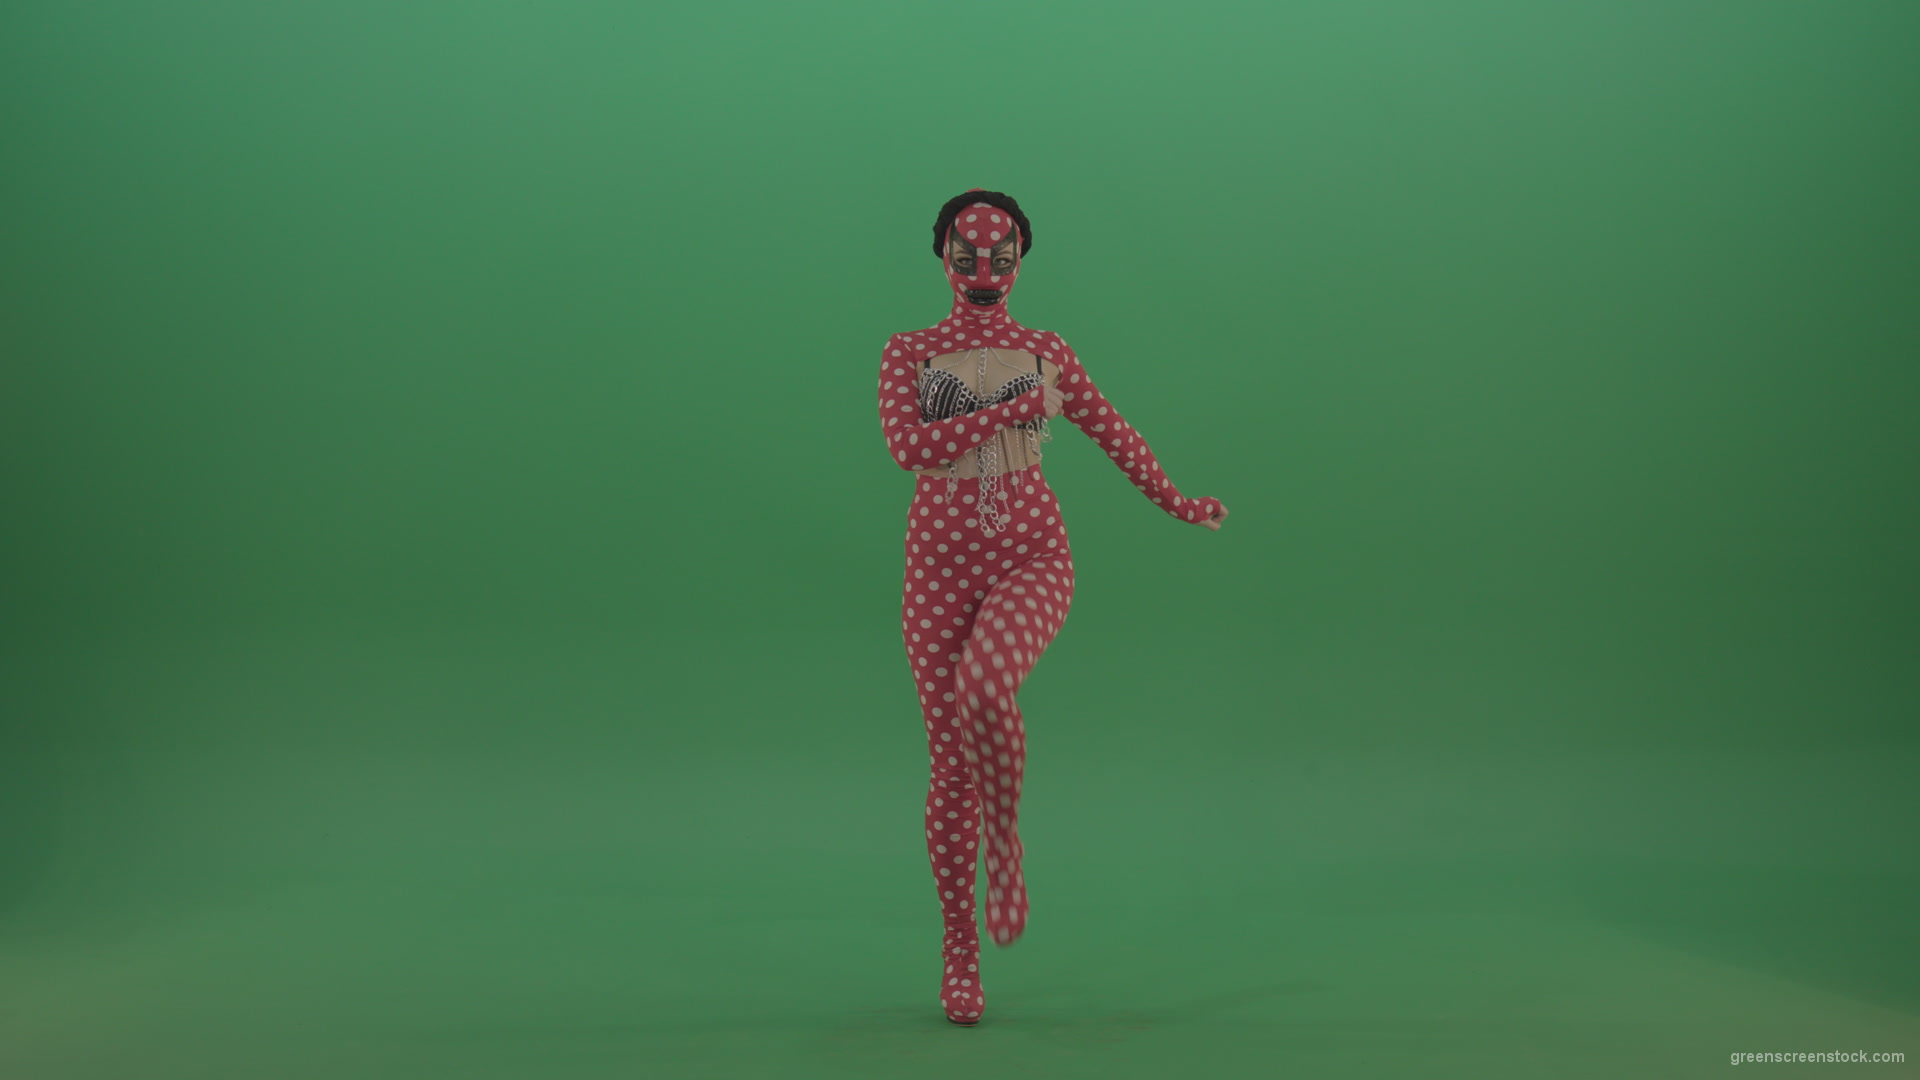 Beauty-red-dress-girl-march-in-front-view-isolated-on-green-screen_004 Green Screen Stock